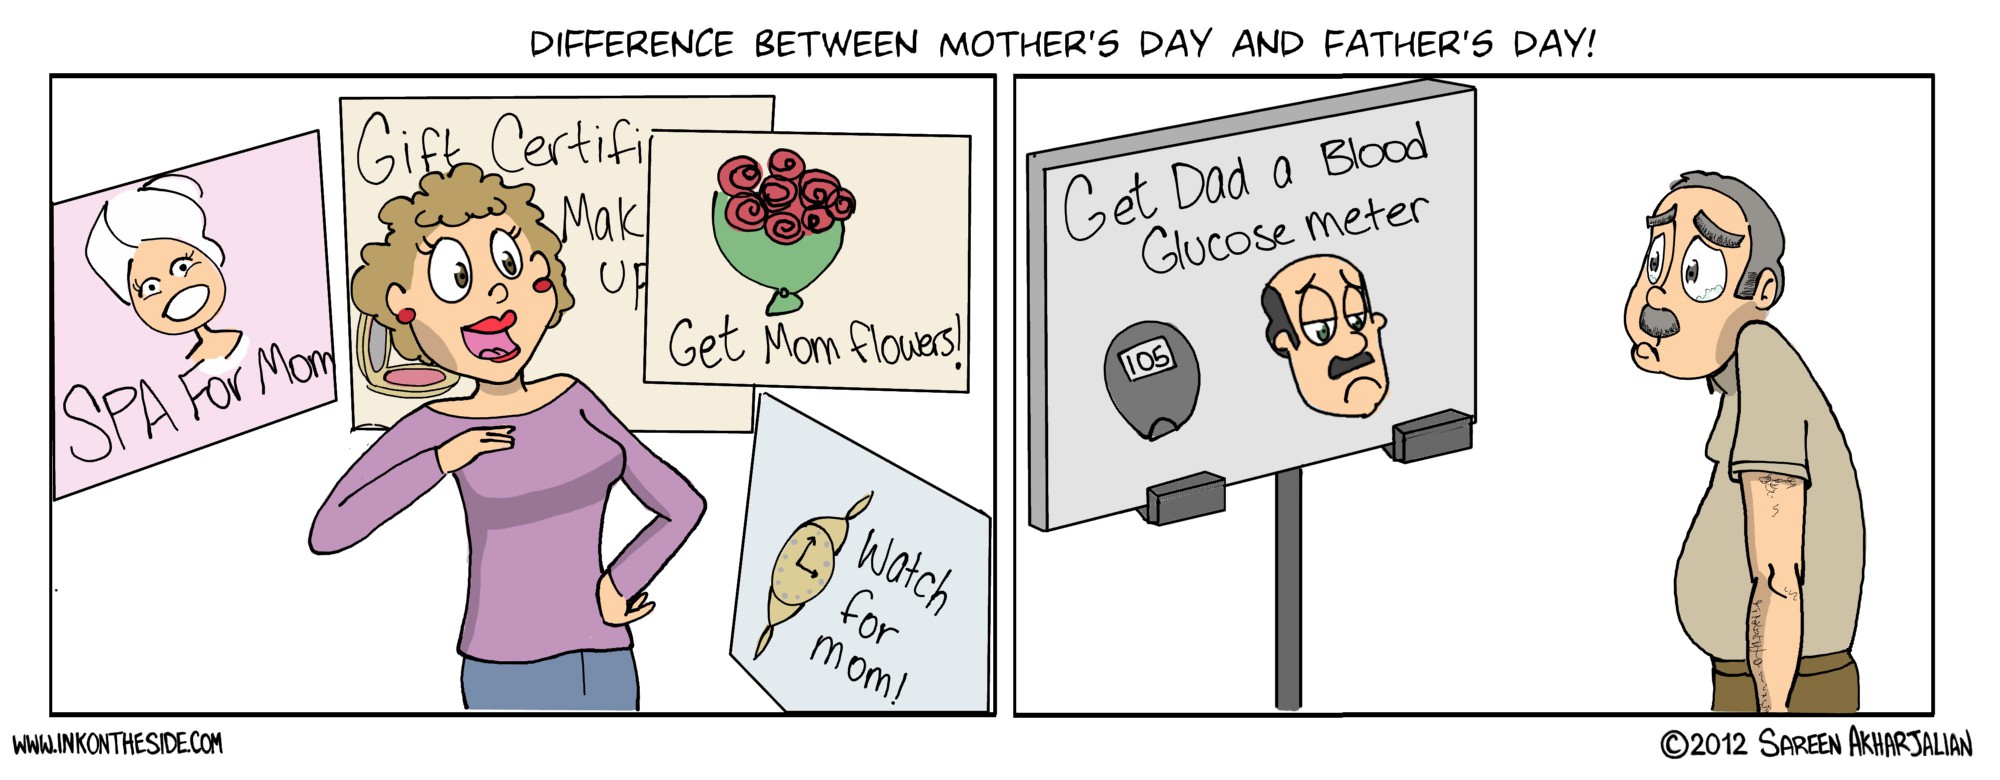 The Difference Between Mother’s Day and Father’s Day!